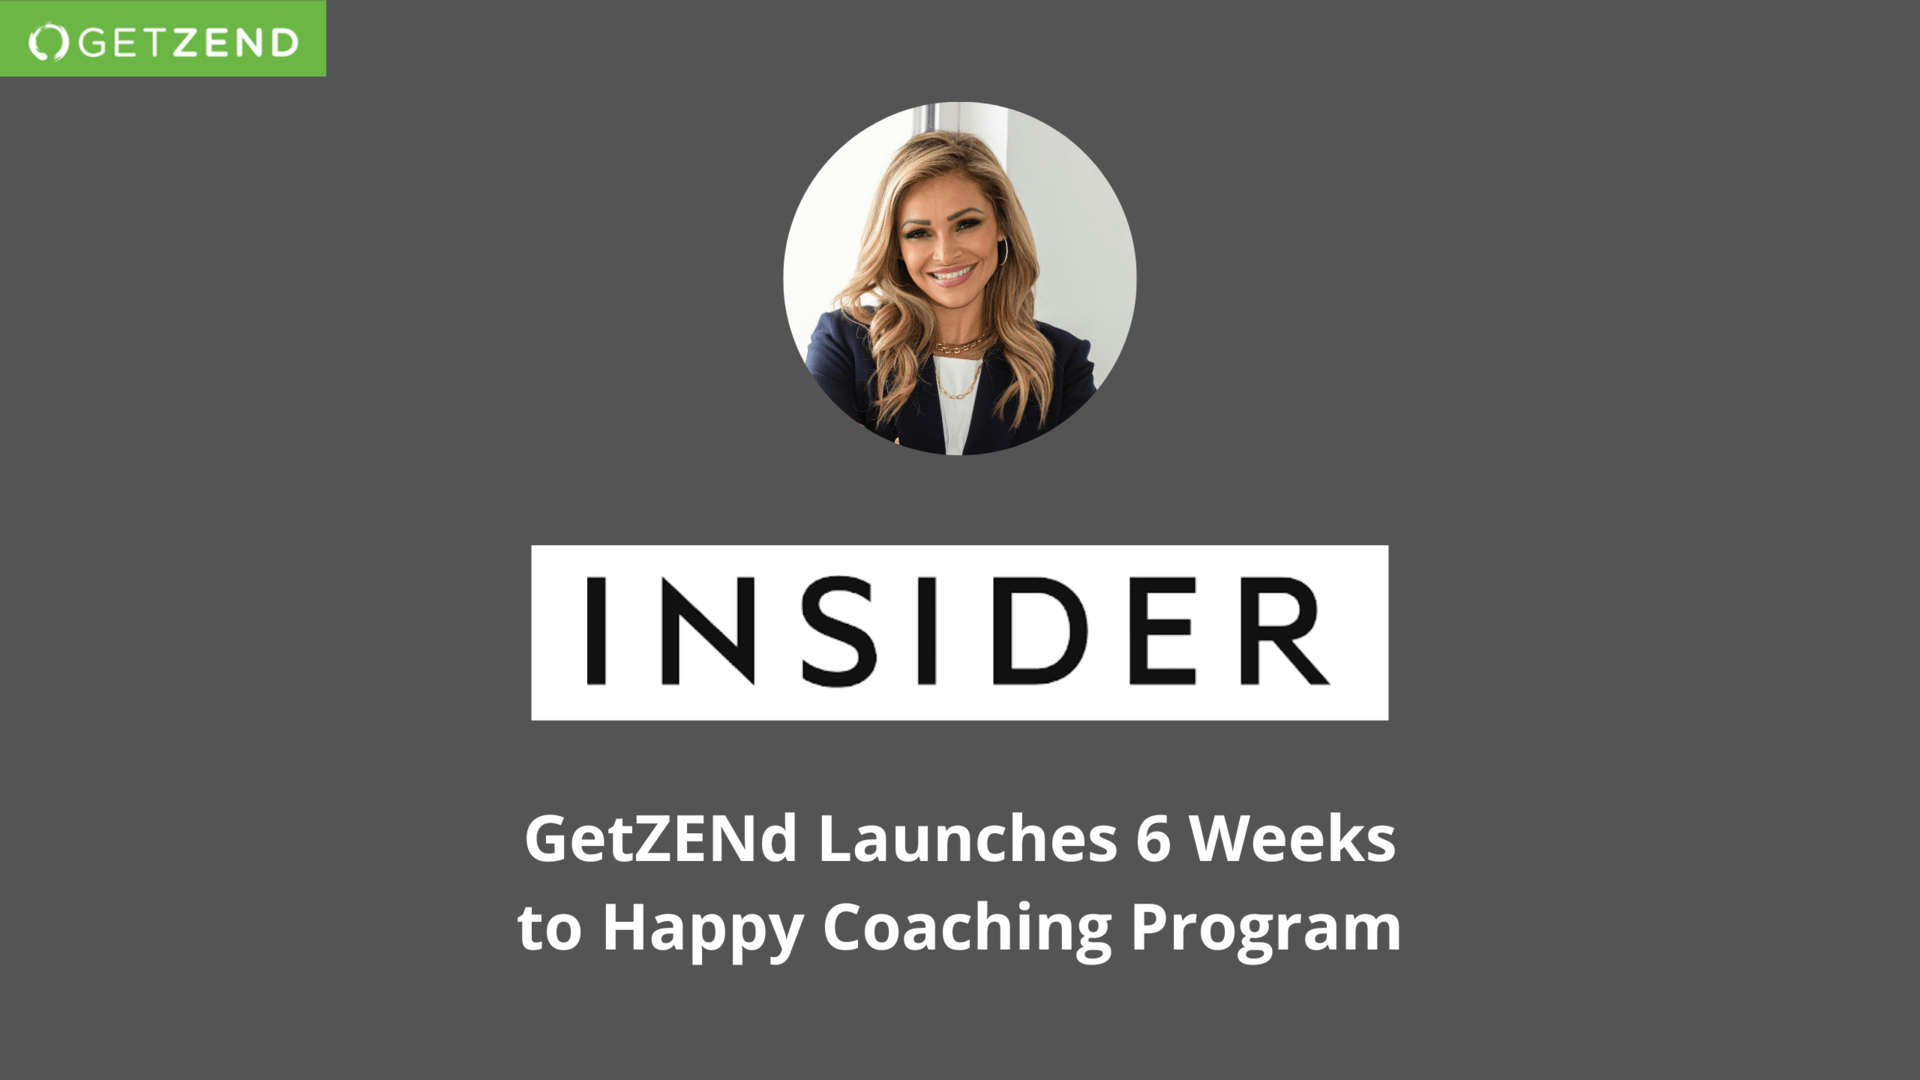 Business Insider shares Launch of GetZENd 6 Weeks to Happy Coaching Program